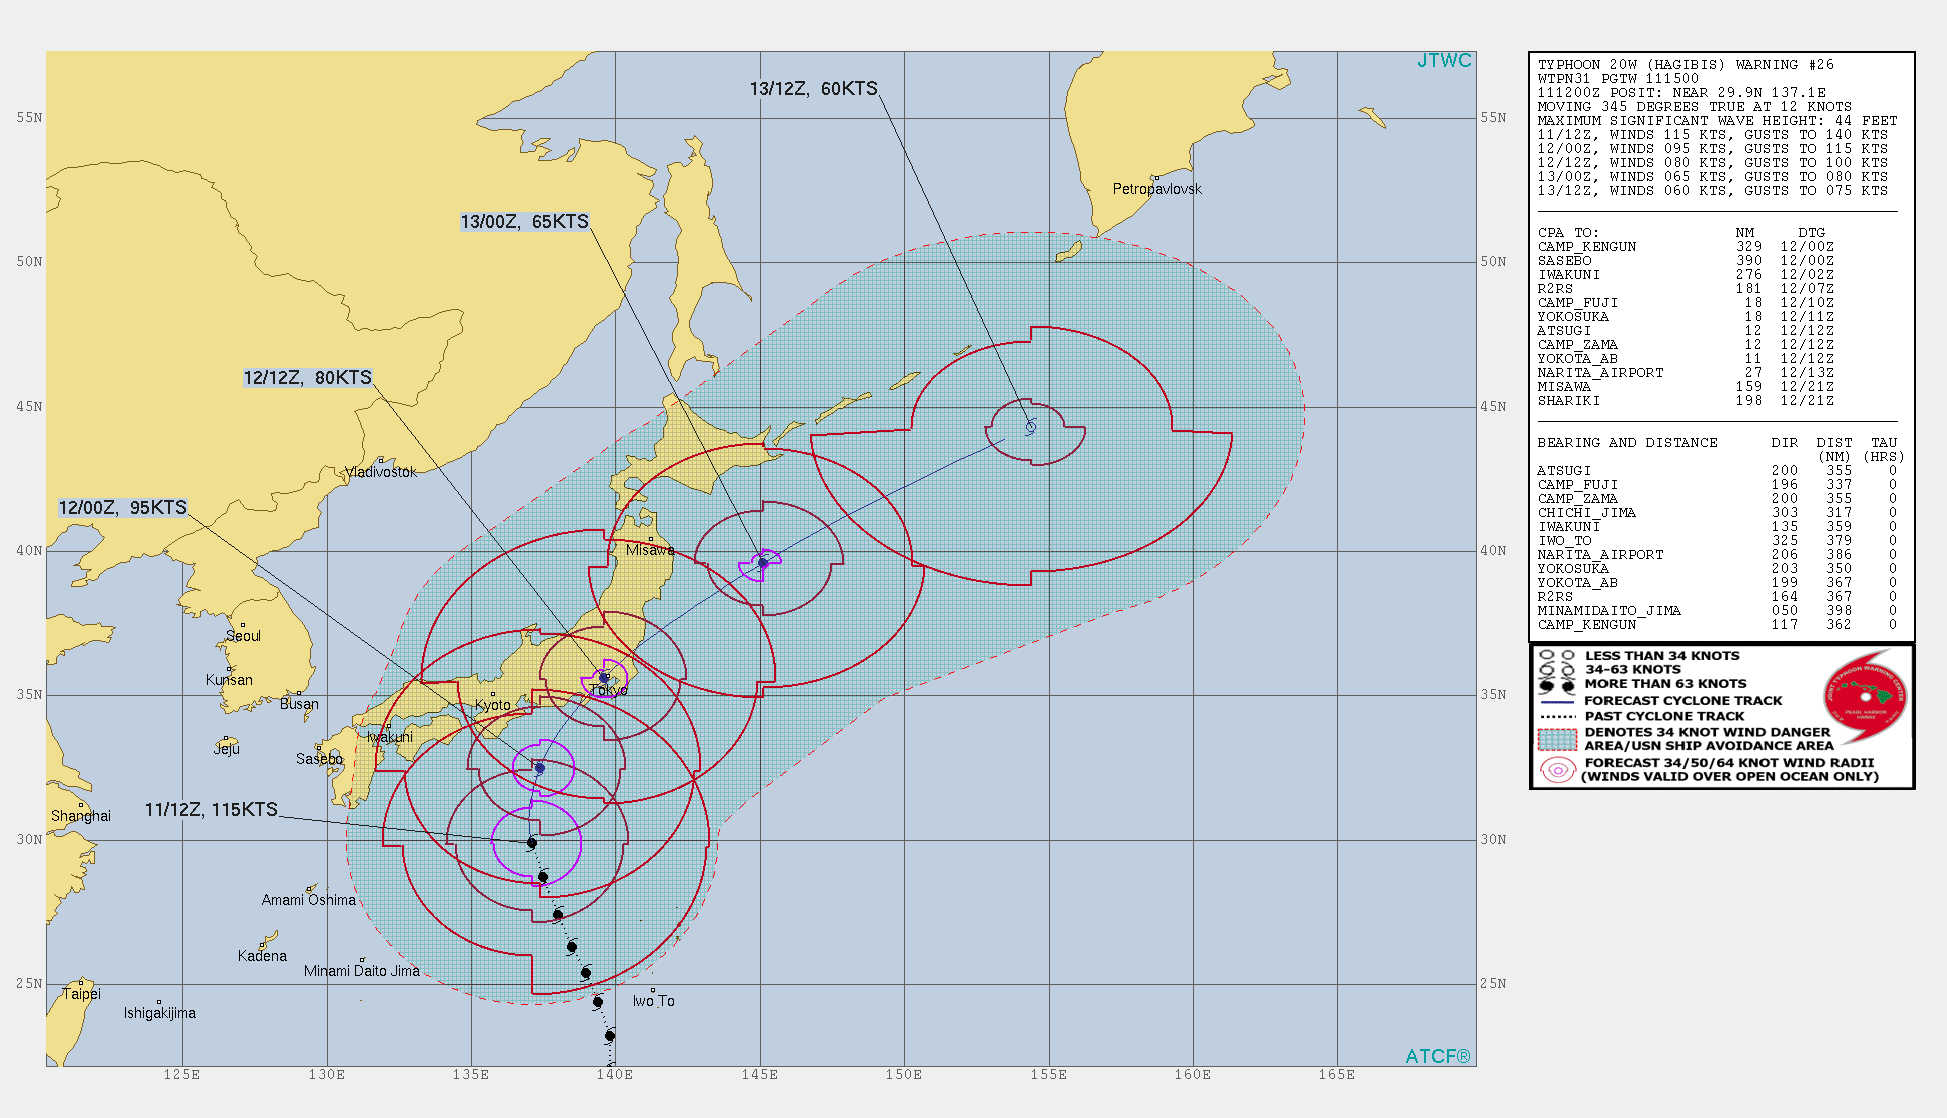 Typhoon Hagibis is forecast to track dangerously close to the Tokyo area shortly before 24h